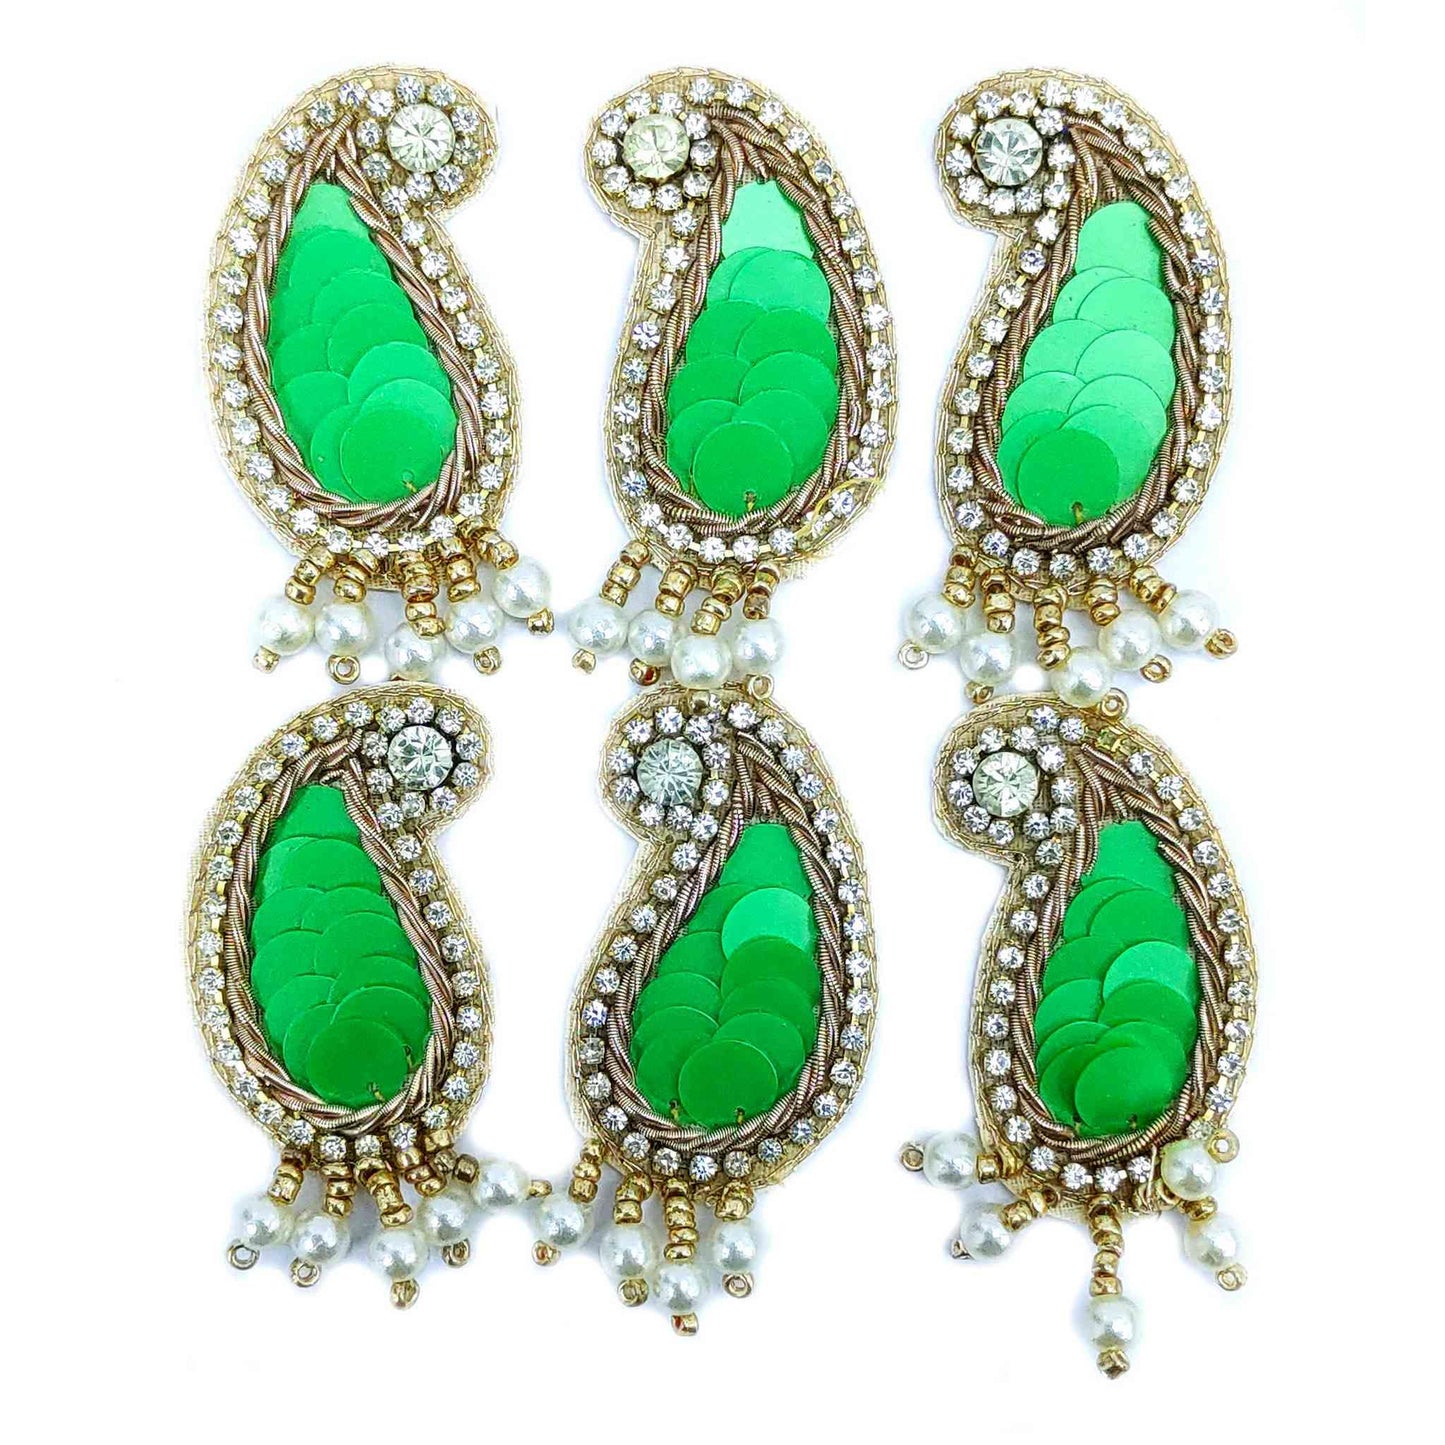 Indian Petals Keri Design Sequence Buti with Stones for DIY Craft, Trouseau Packing or Decoration (Bunch of 12) - Design 209, Green - Indian Petals